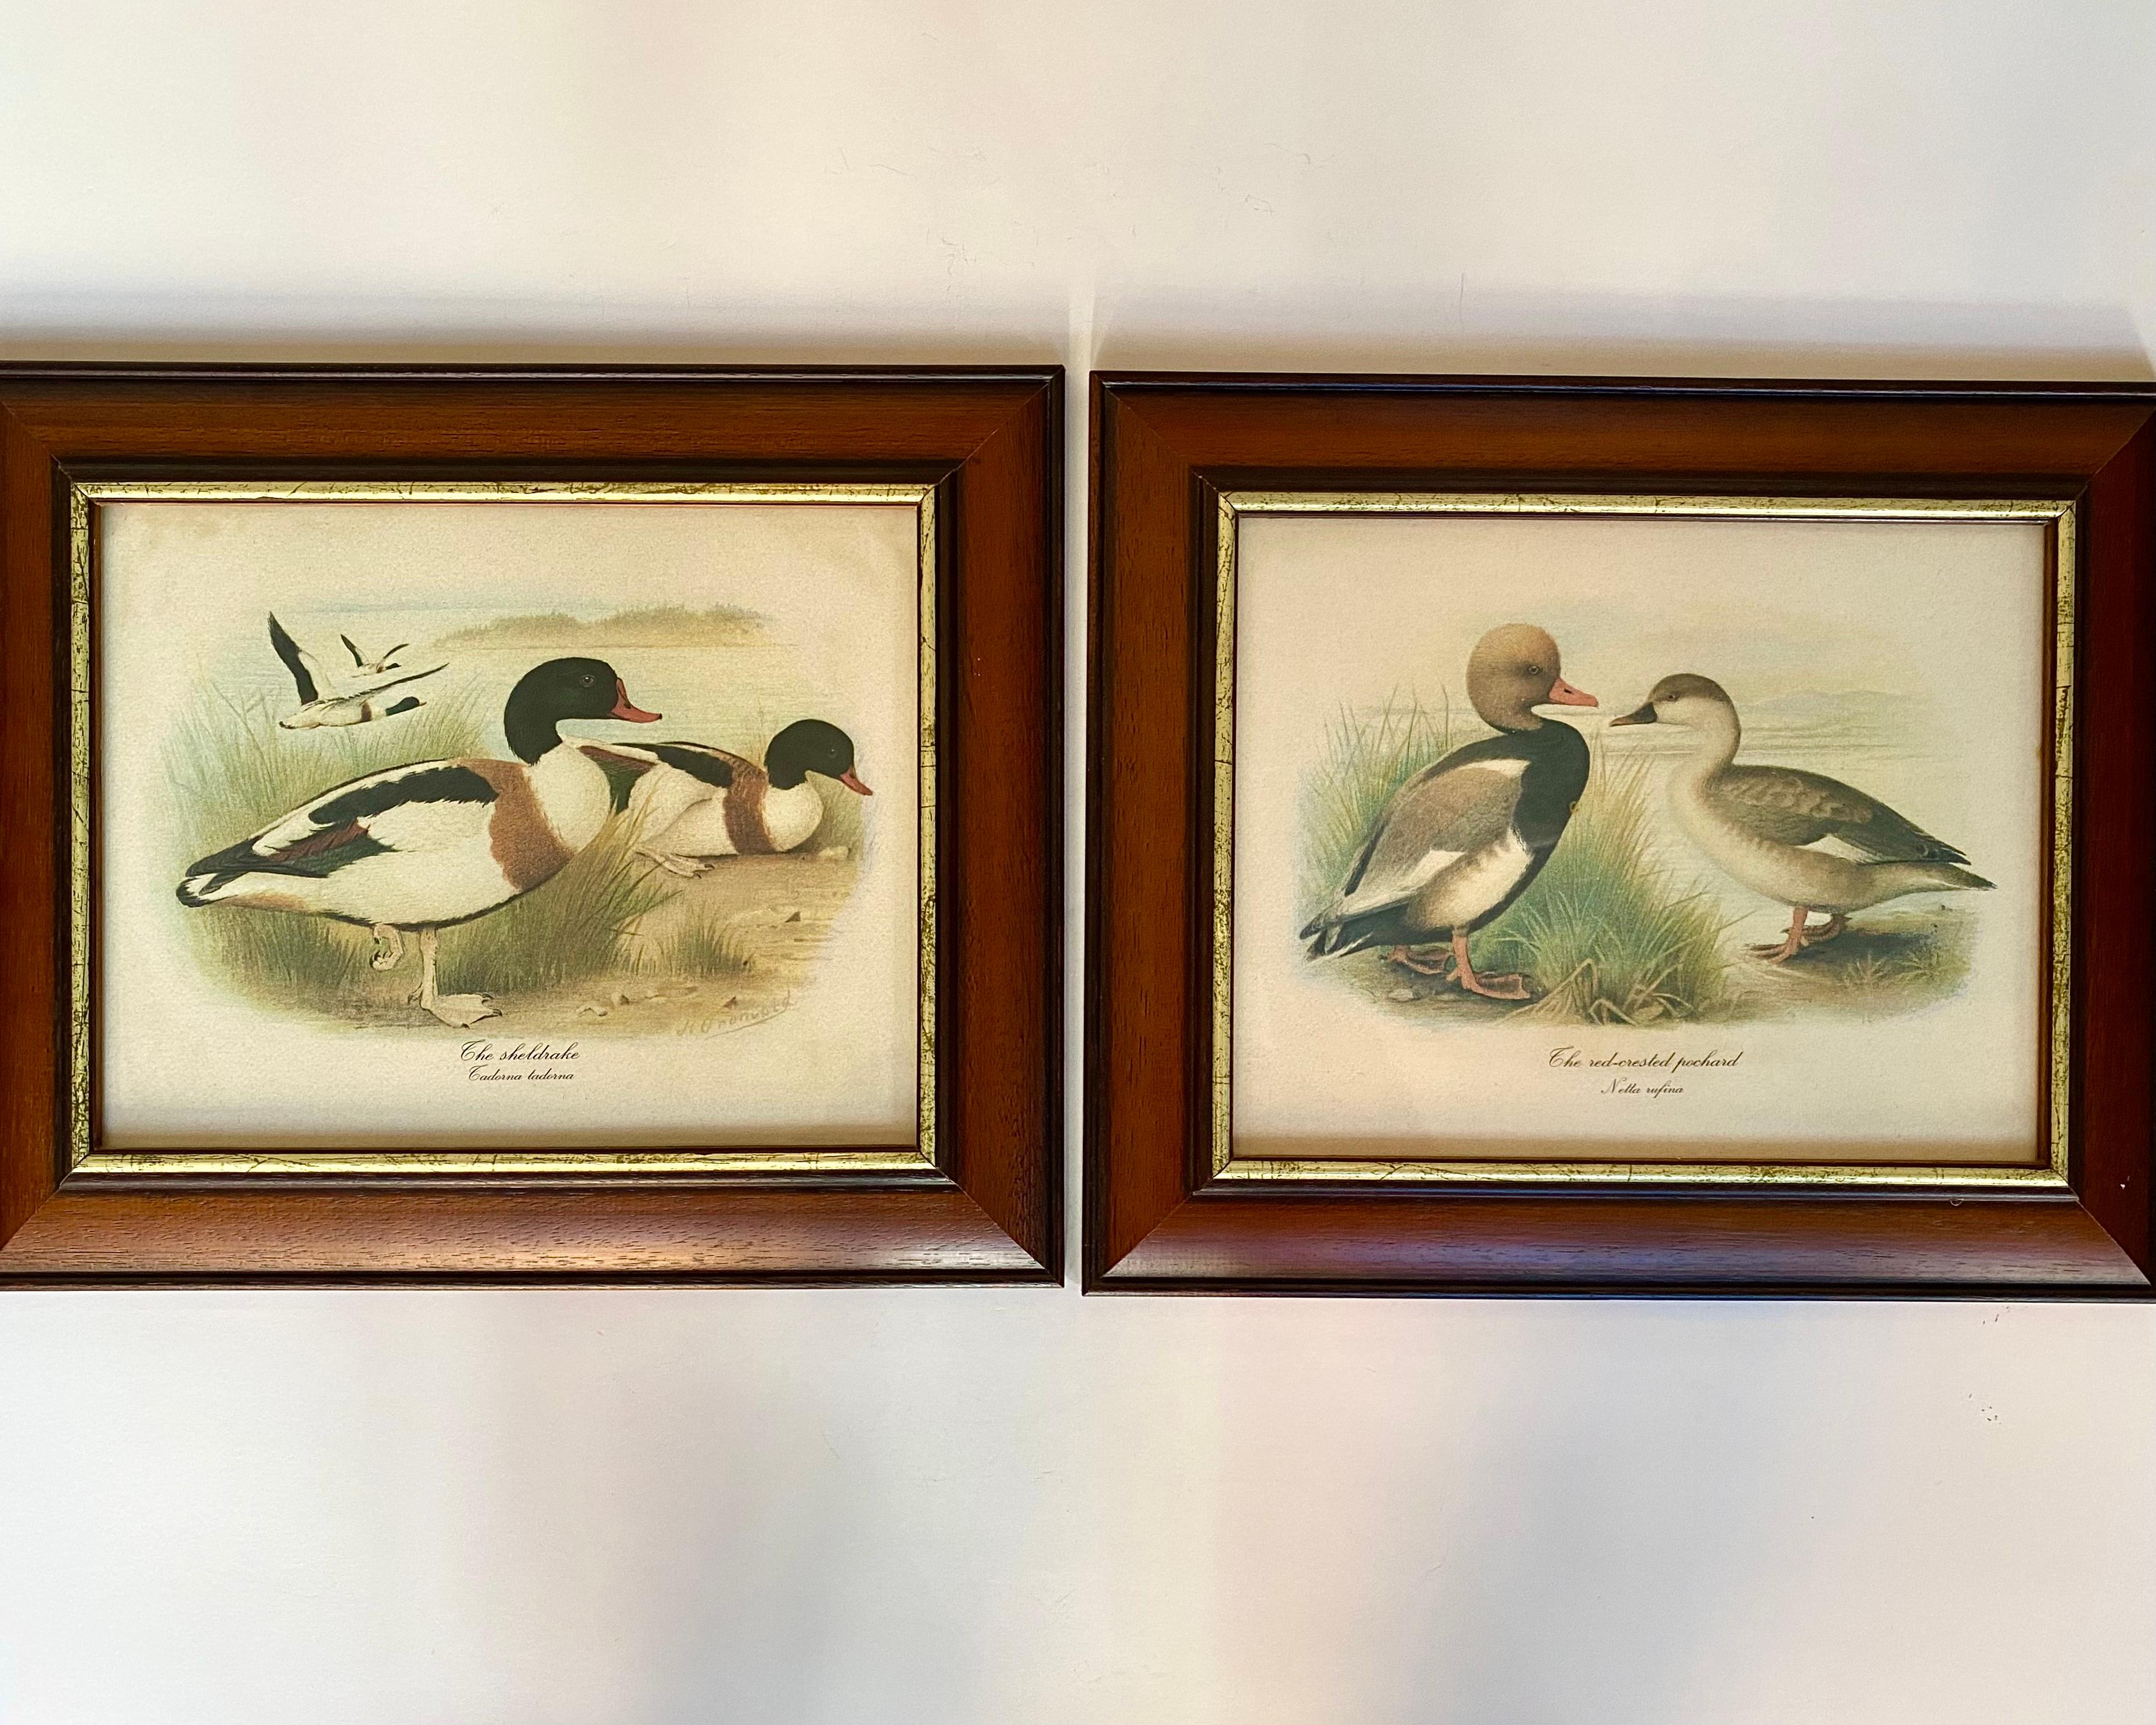 A charming set of 2 wall hangings featuring a different type of duck bird.

Birds: the red crested pochard, sheldrake.

They are pictured in their natural habitat of grassy water so most likely a pond or a river. The frames are wooden with